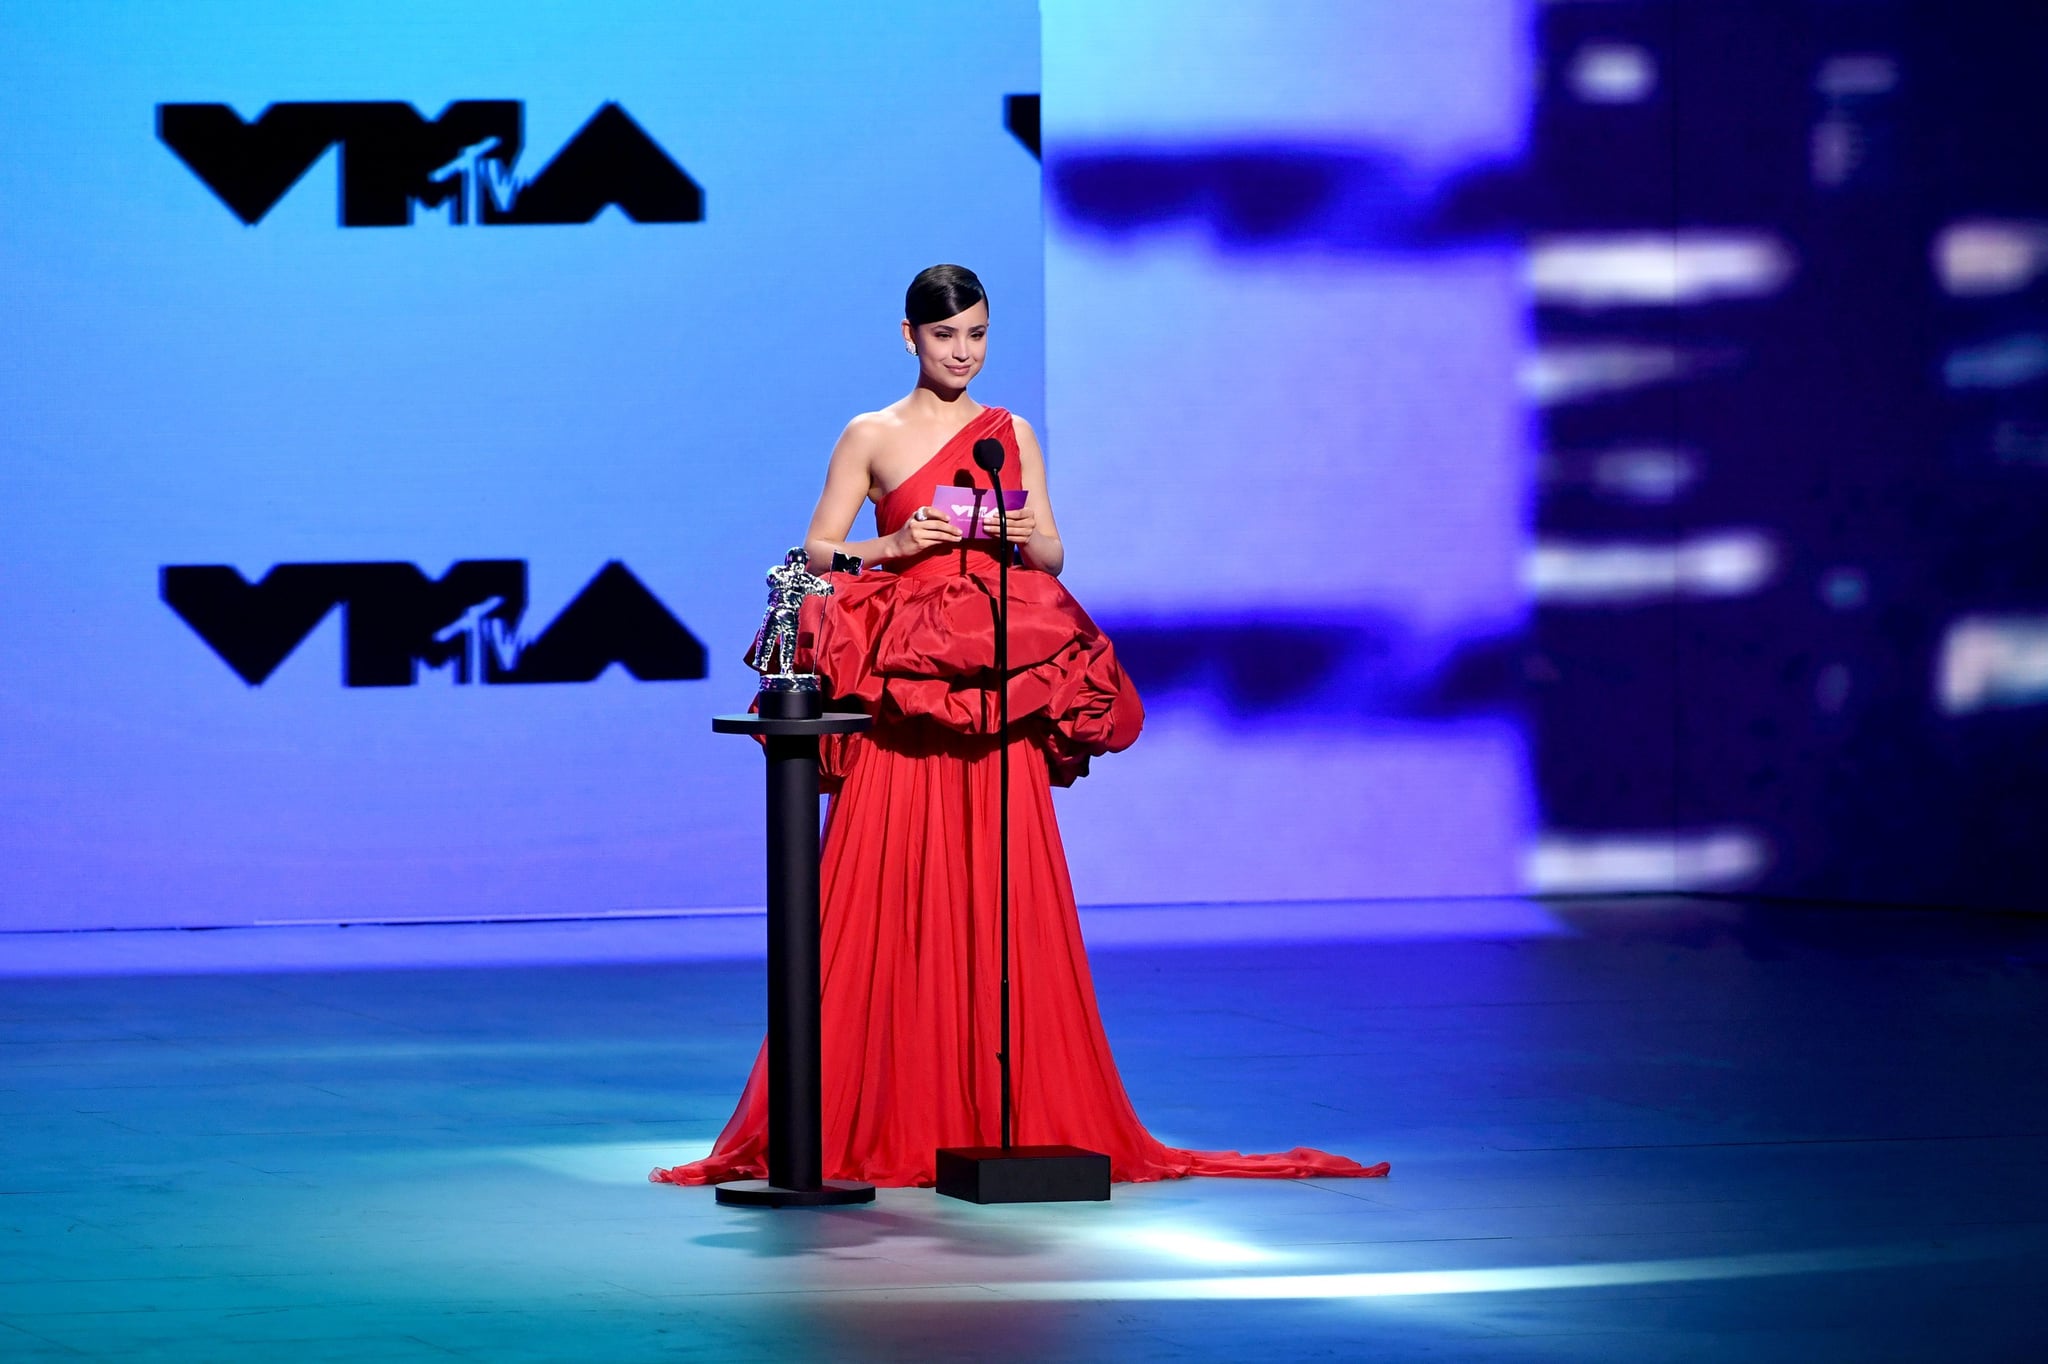 UNSPECIFIED - AUGUST 2020: Sofia Carson speaks onstage during the 2020 MTV Video Music Awards, broadcast on Sunday, August 30th 2020. (Photo by Kevin Winter/MTV VMAs 2020/Getty Images for MTV)